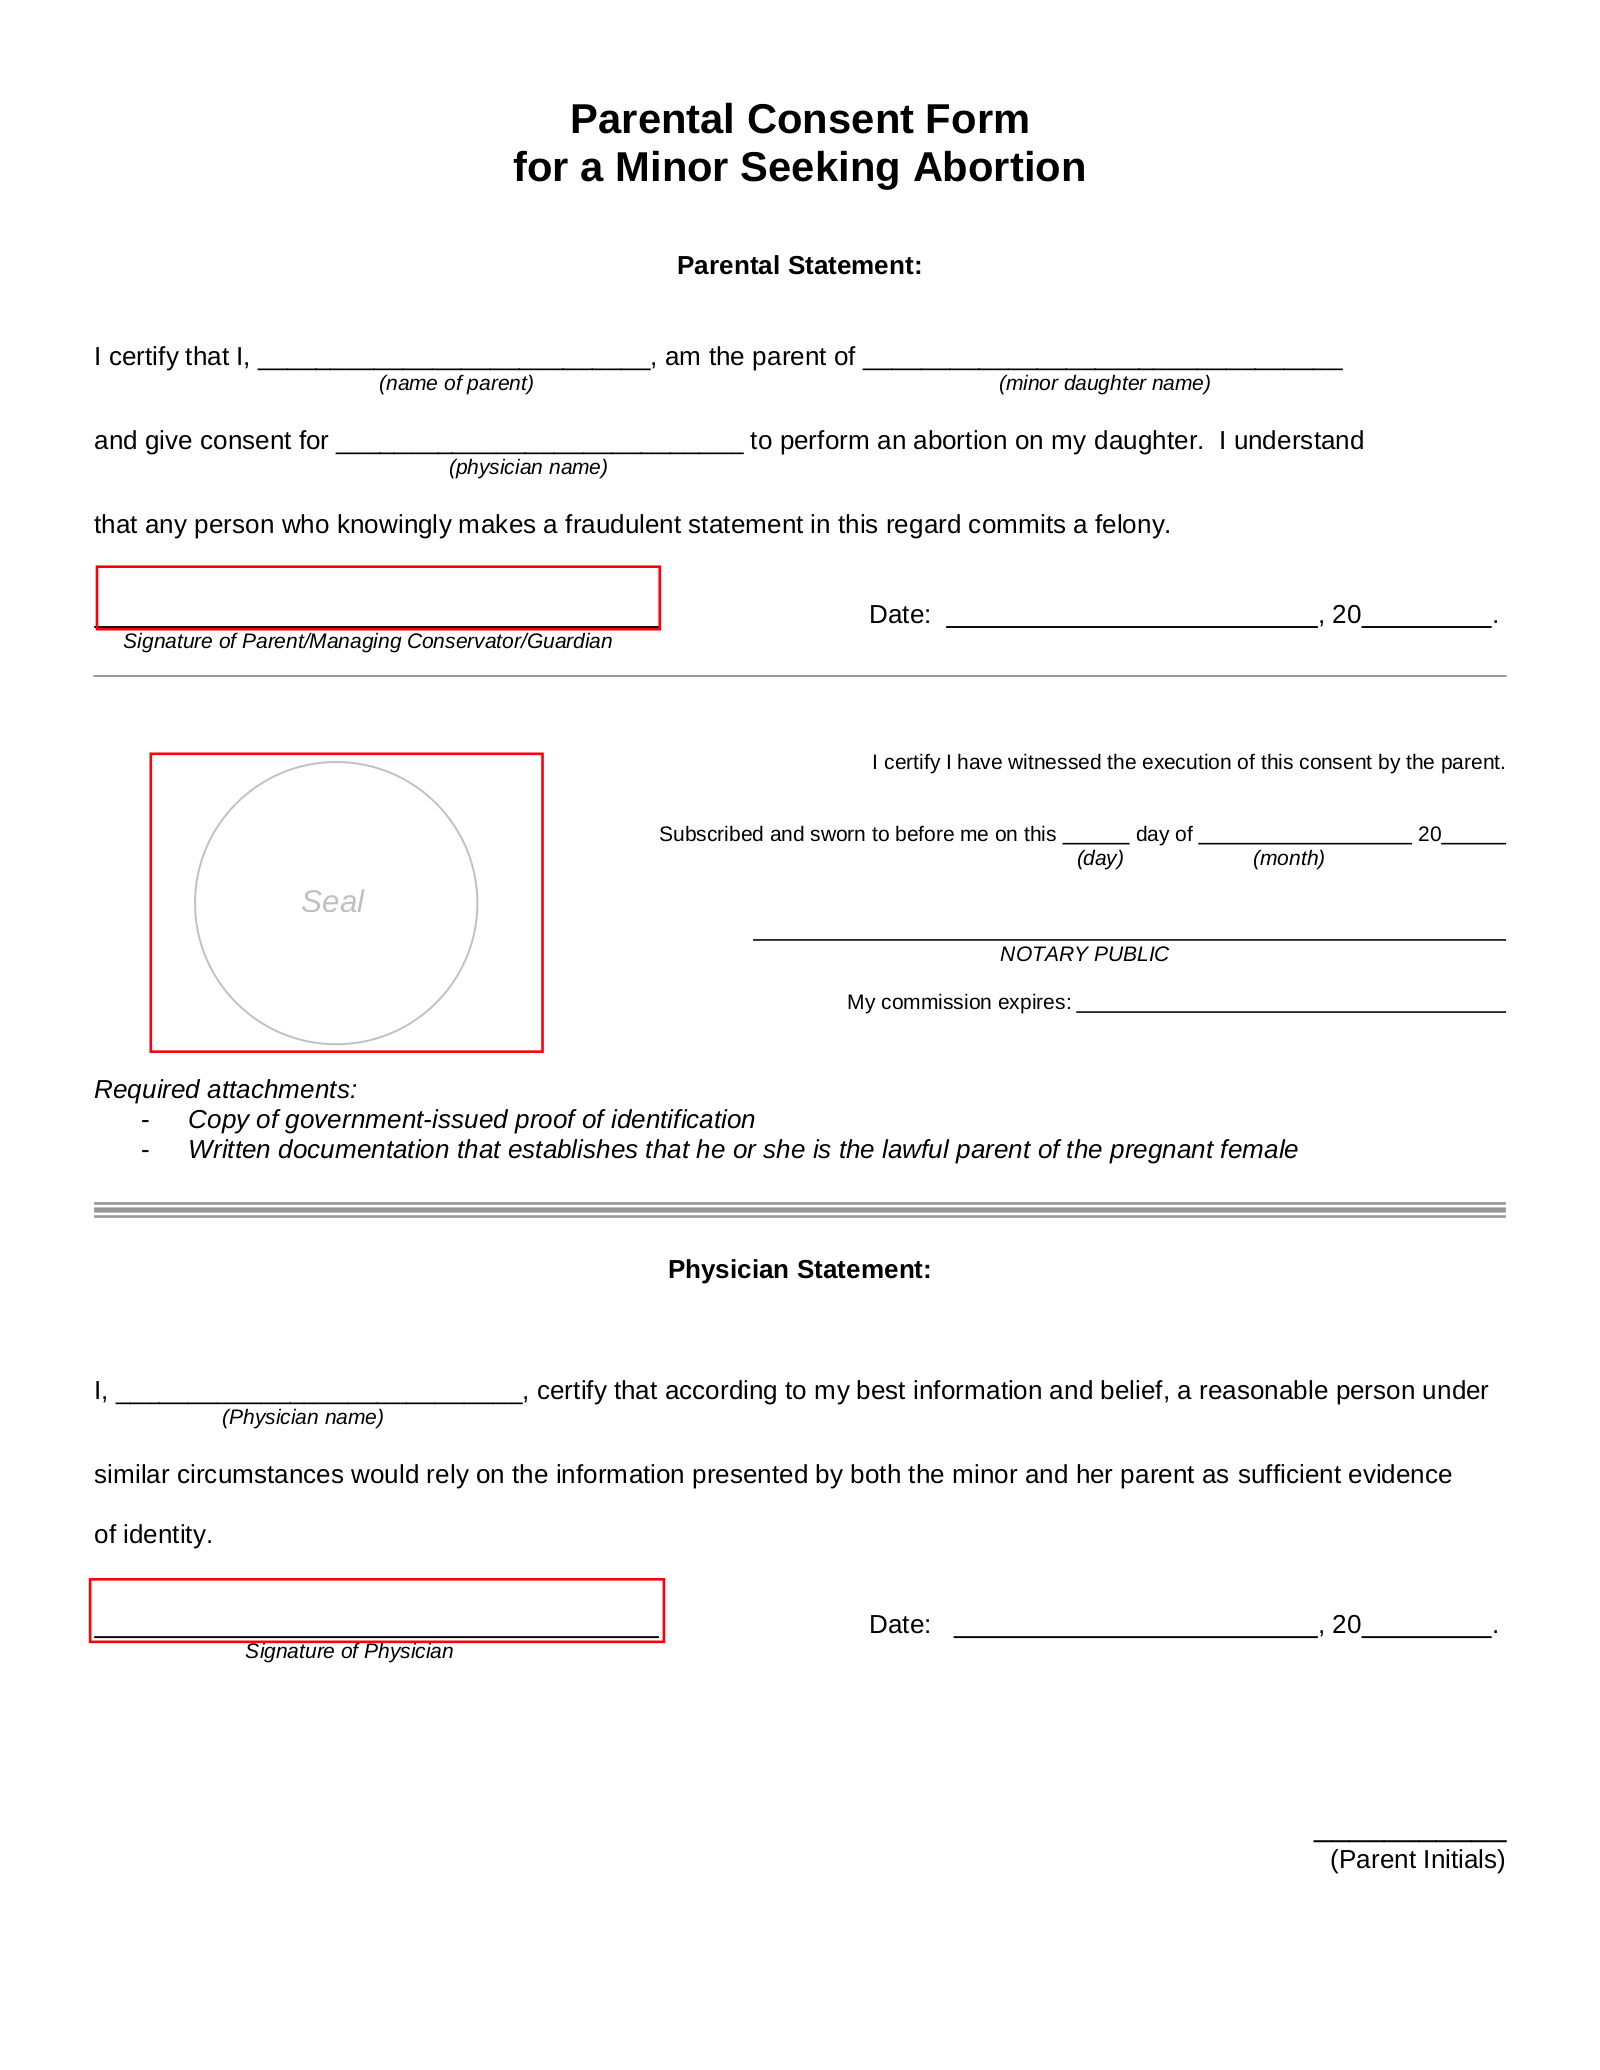 Free Abortion Parental Consent Form For A Minor Child PDF 